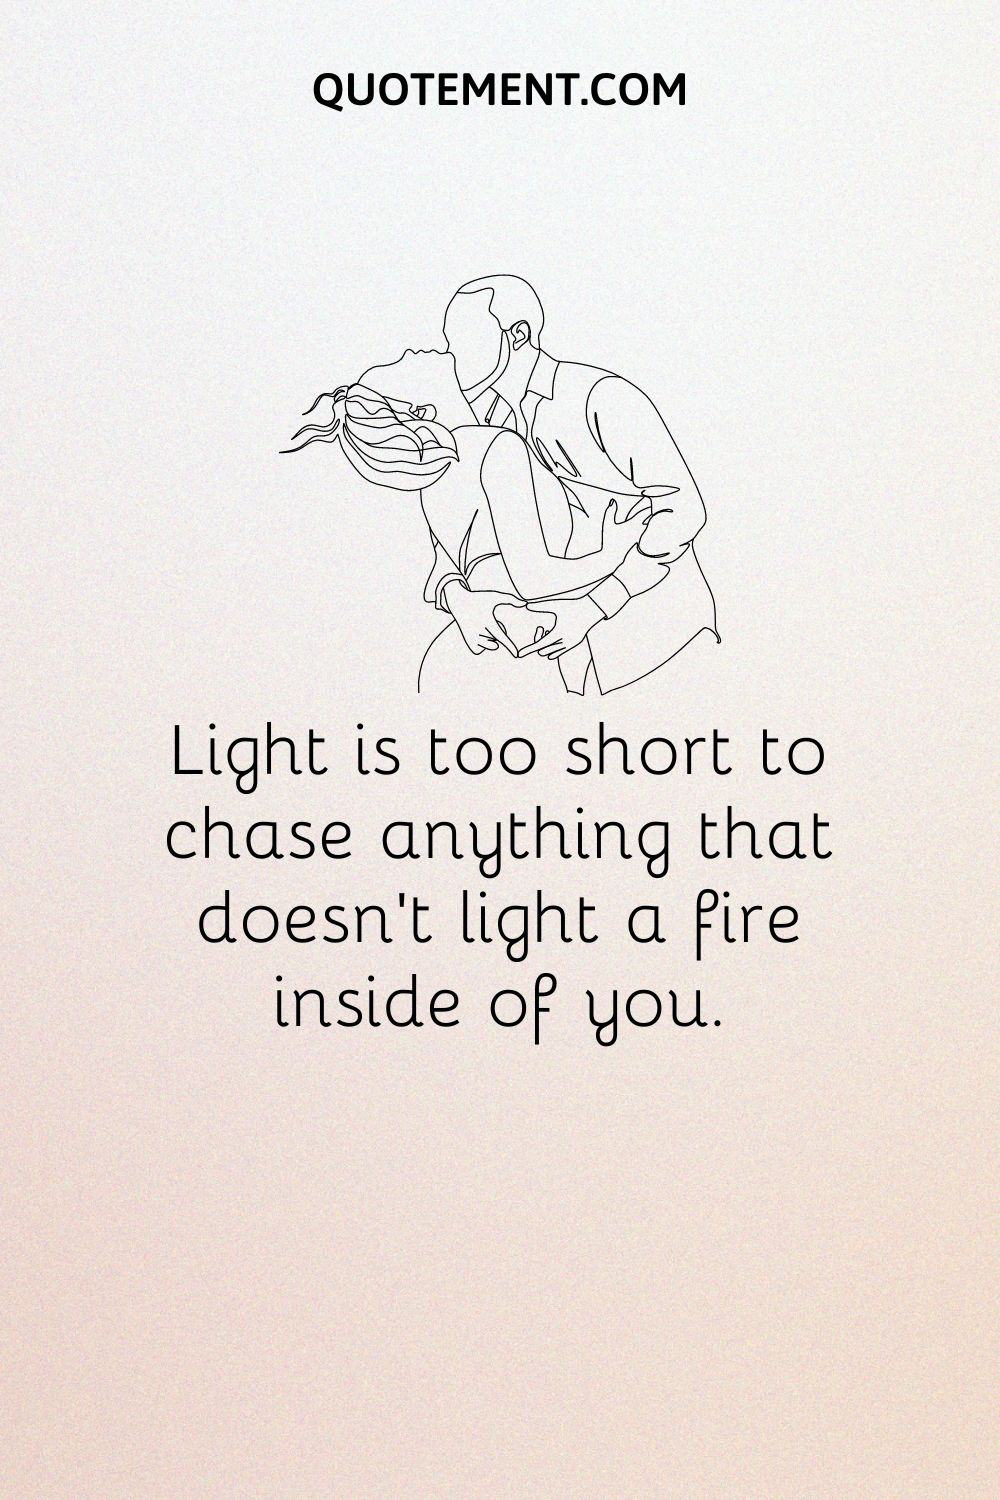 Light is too short to chase anything that doesn’t light a fire inside of you